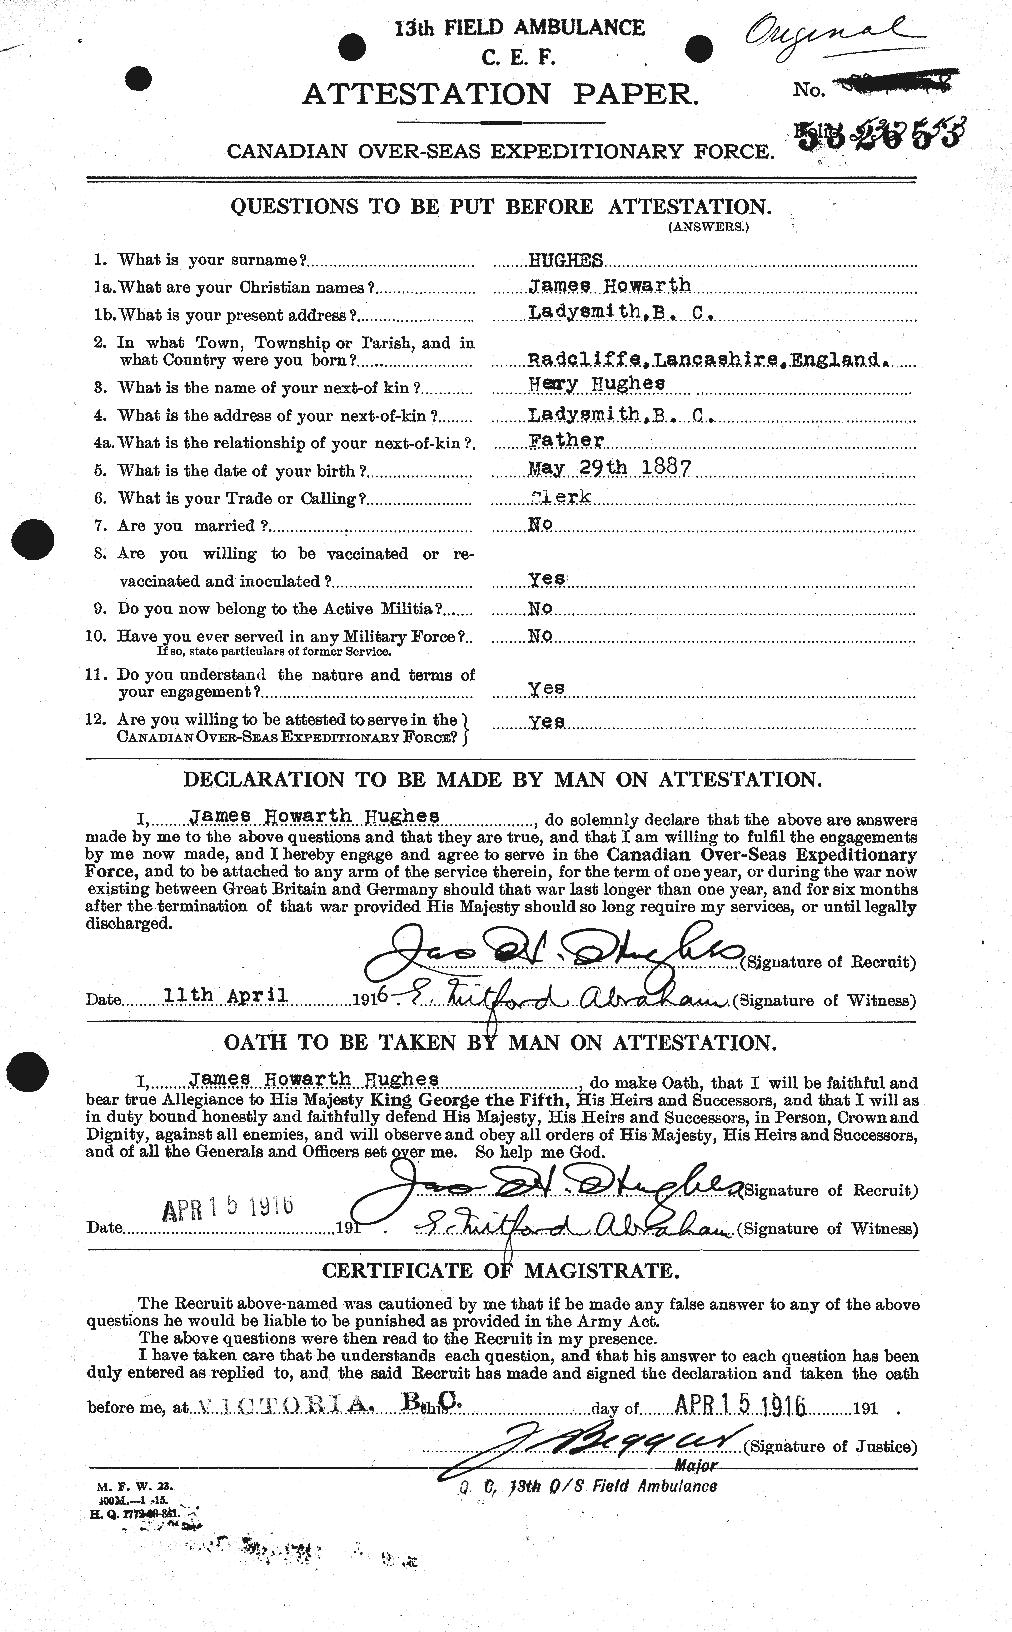 Personnel Records of the First World War - CEF 403965a